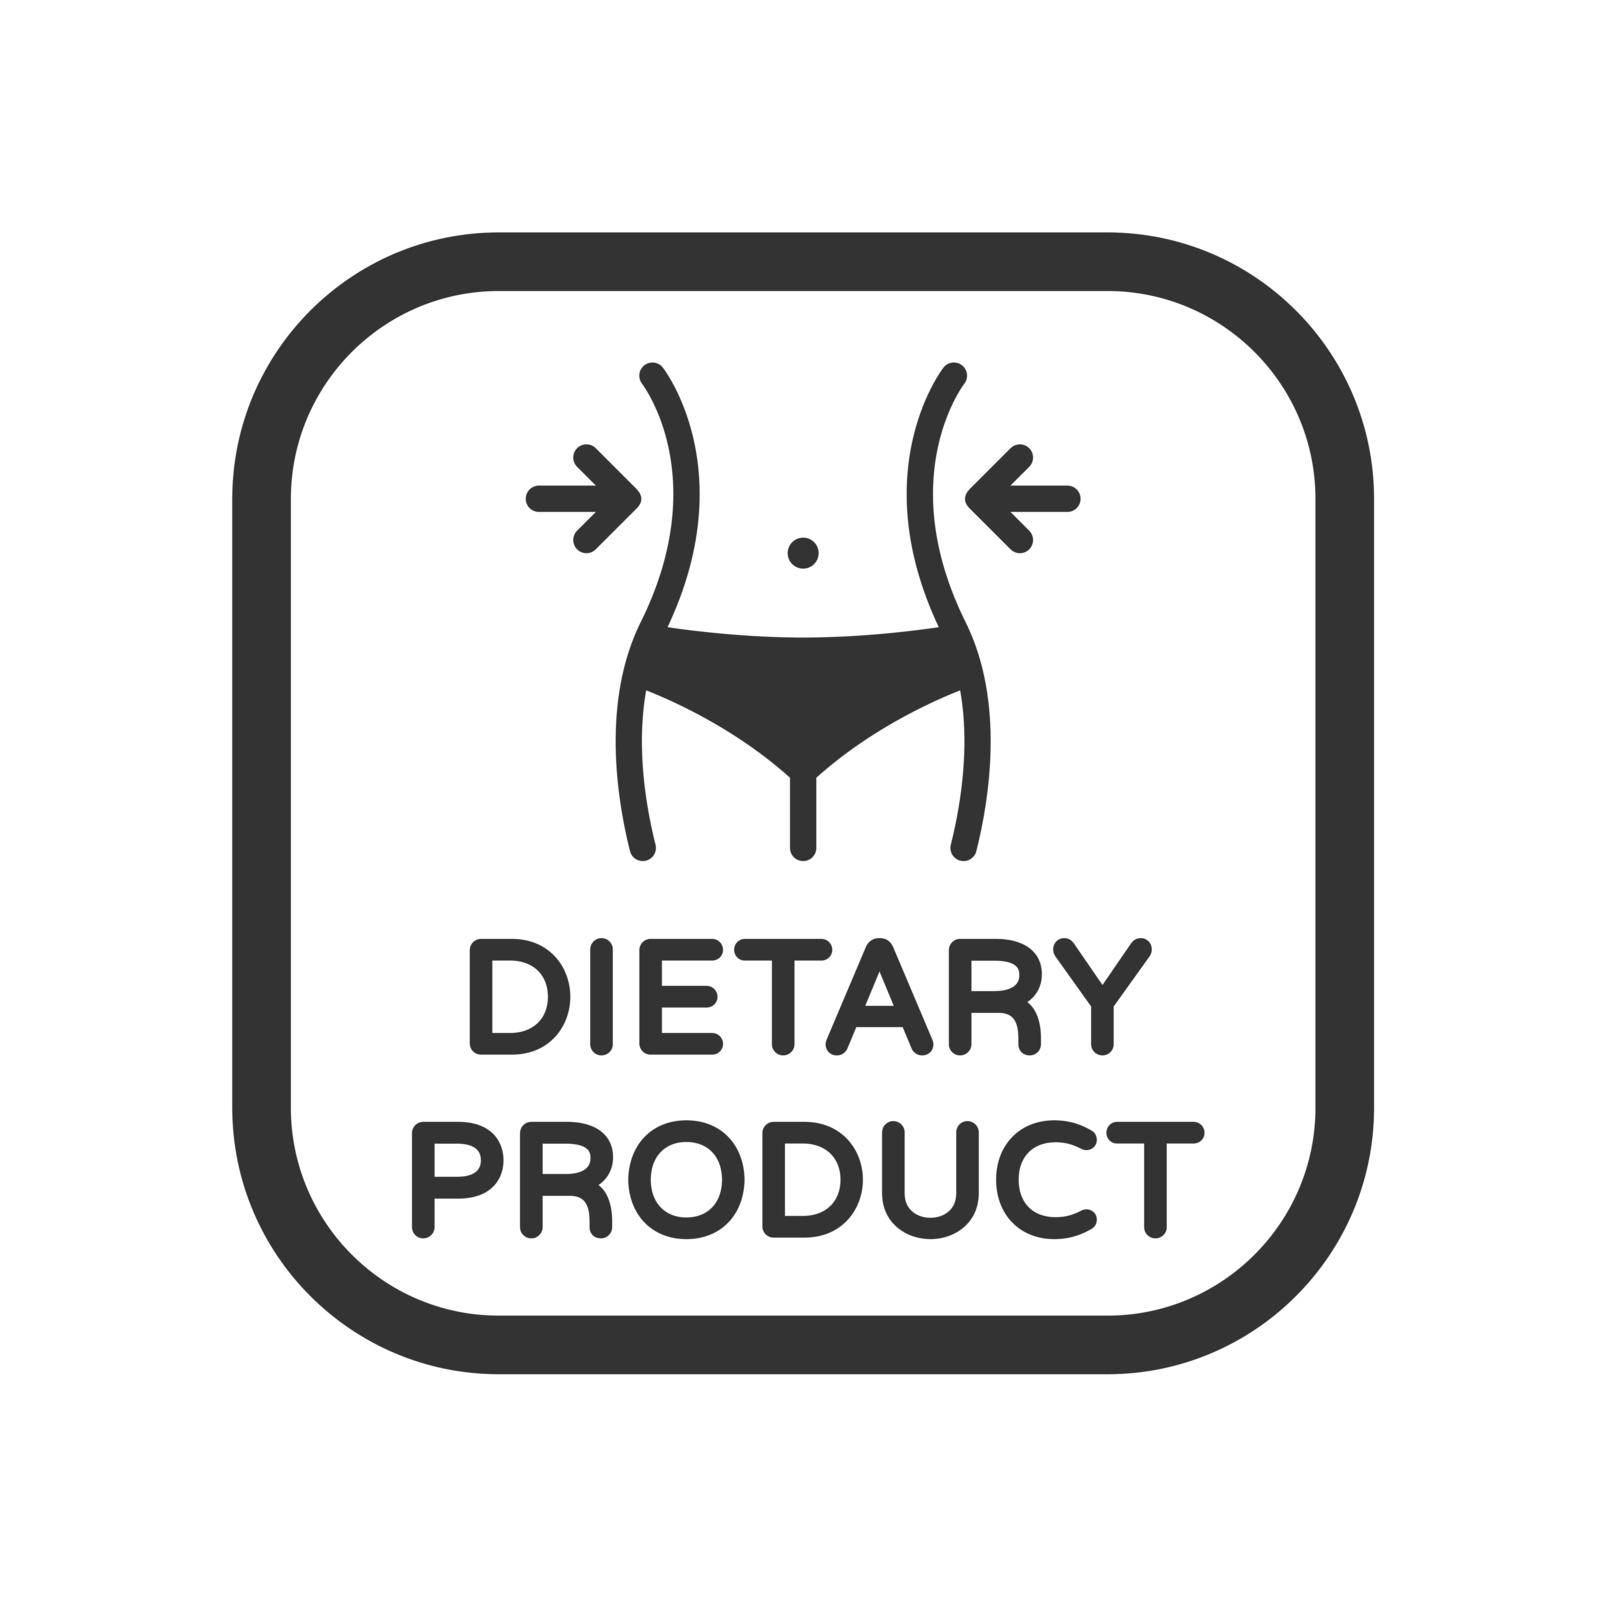 Dietary product vector icon. Food for weight loss symbol. Female waist stock vector illustration for printing on diet food packaging by govindamadhava108